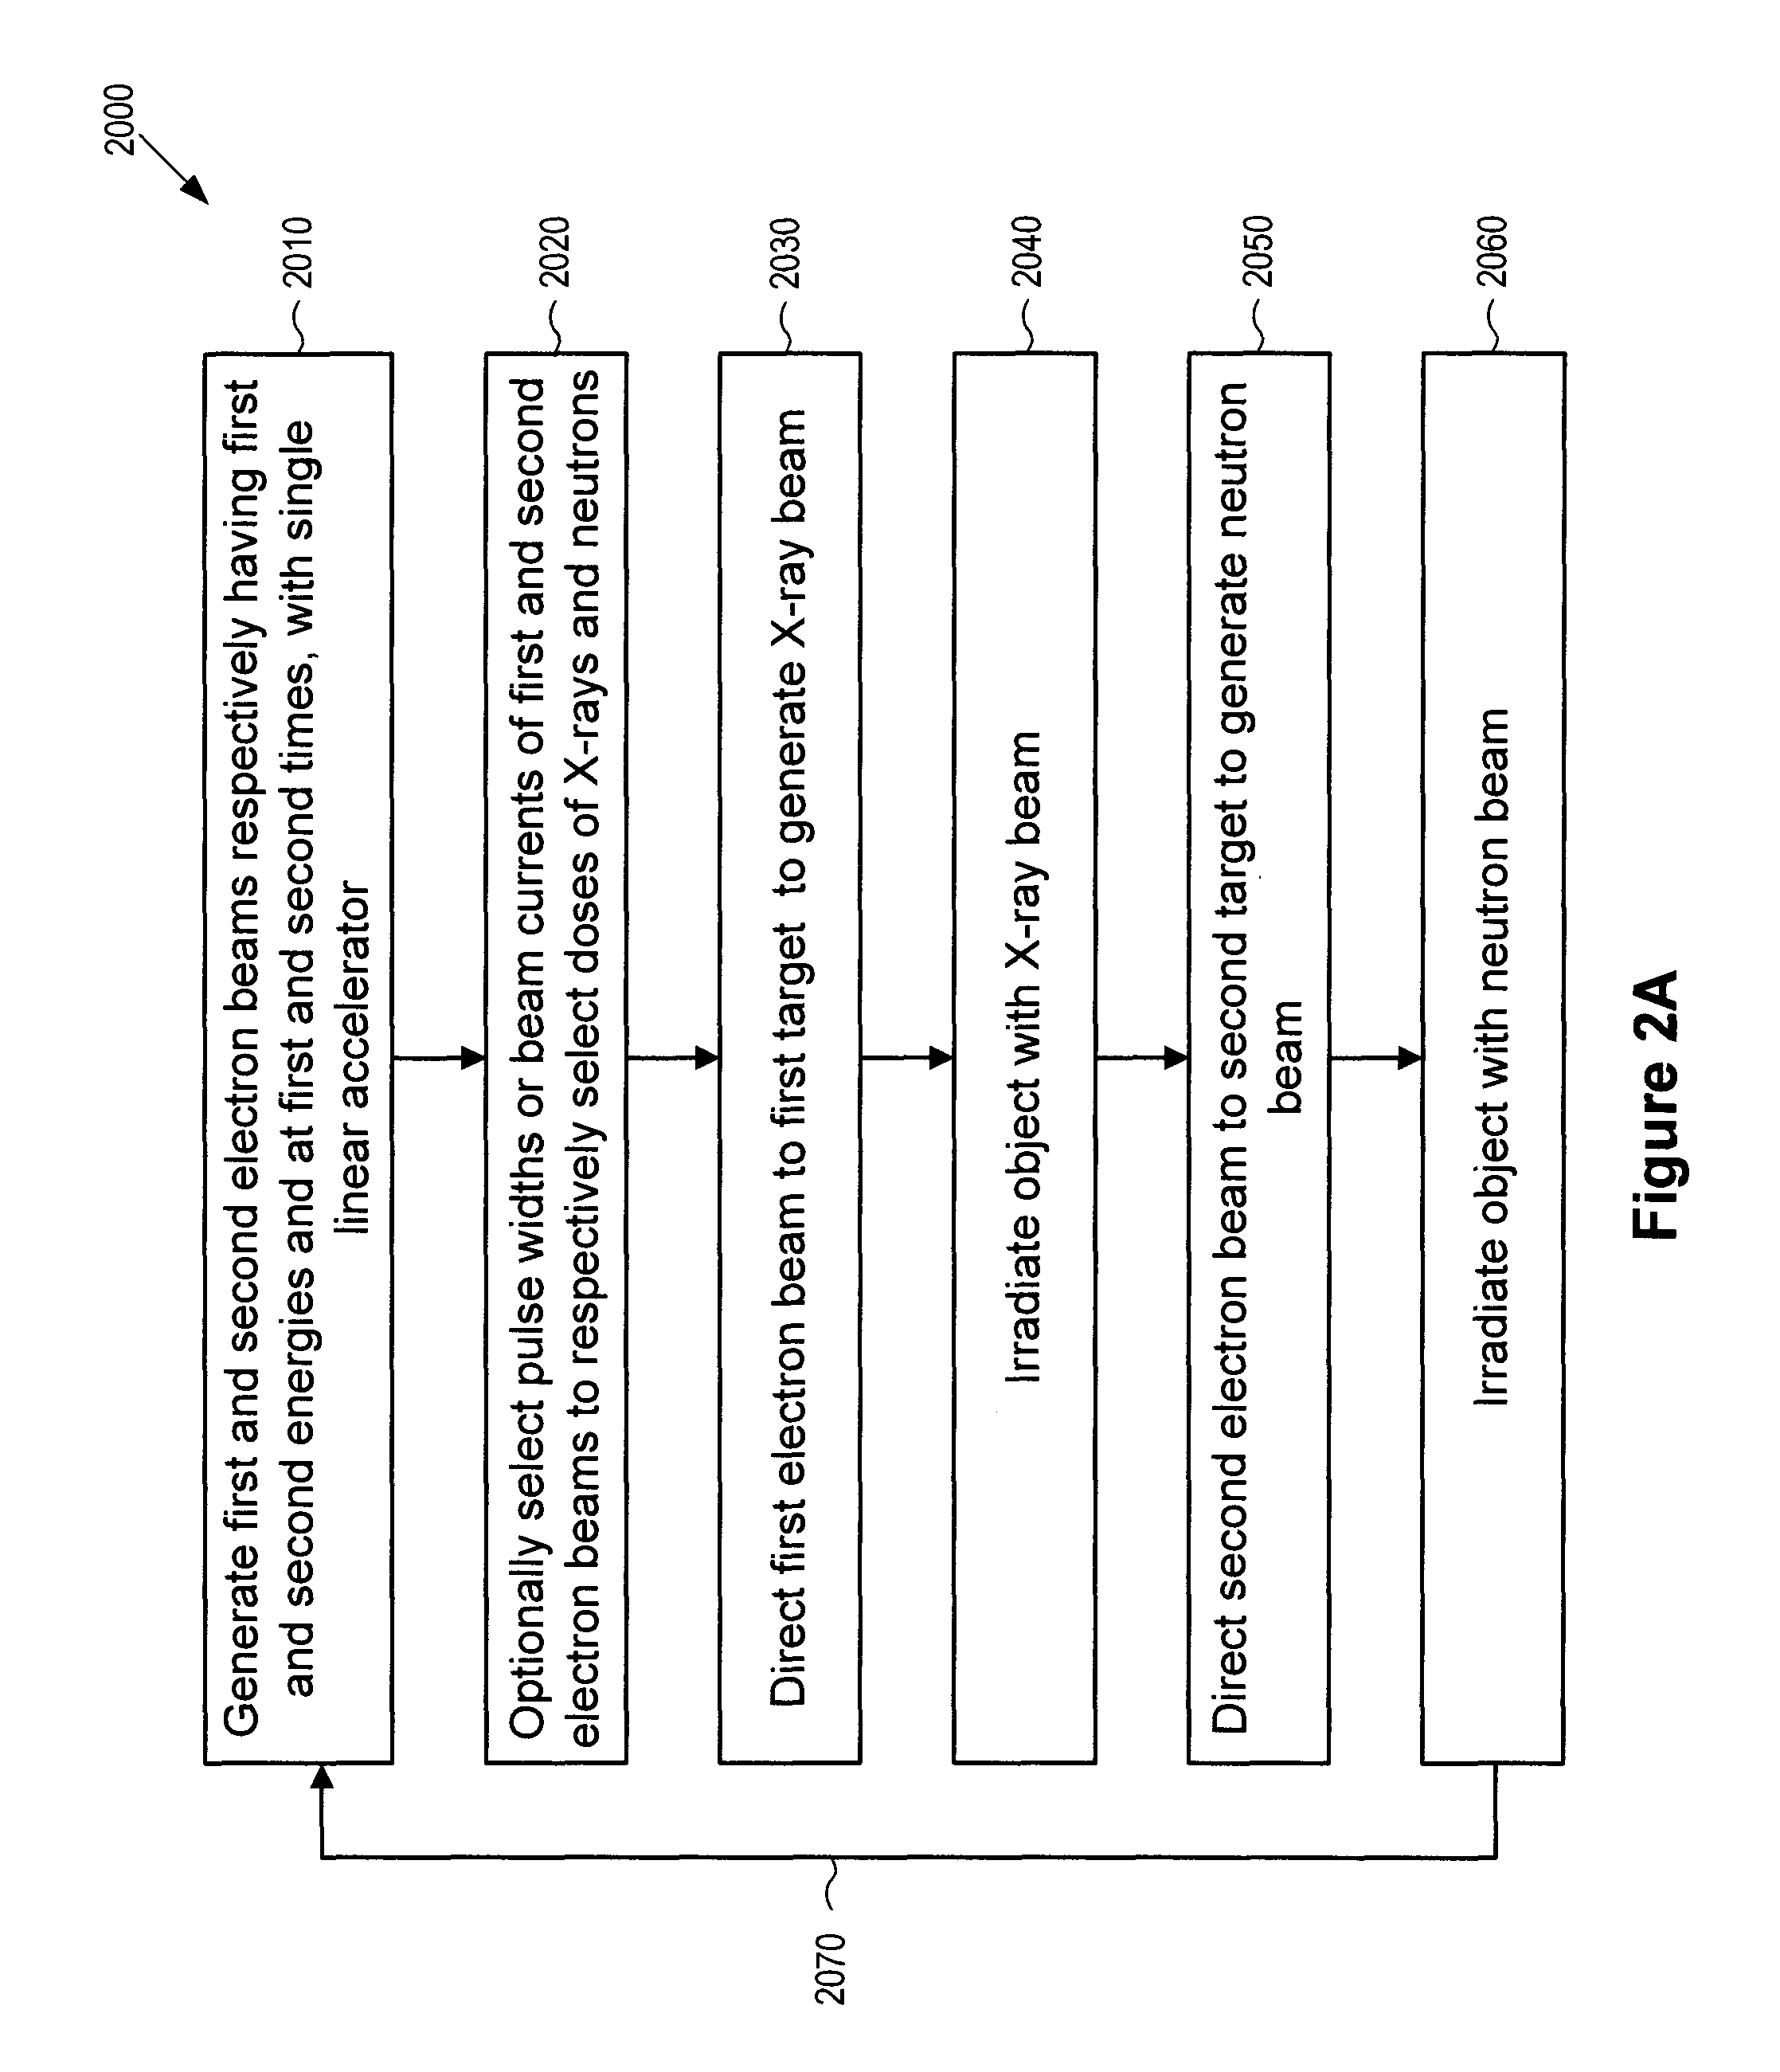 Systems and methods for generating X-rays and neutrons using a single linear accelerator